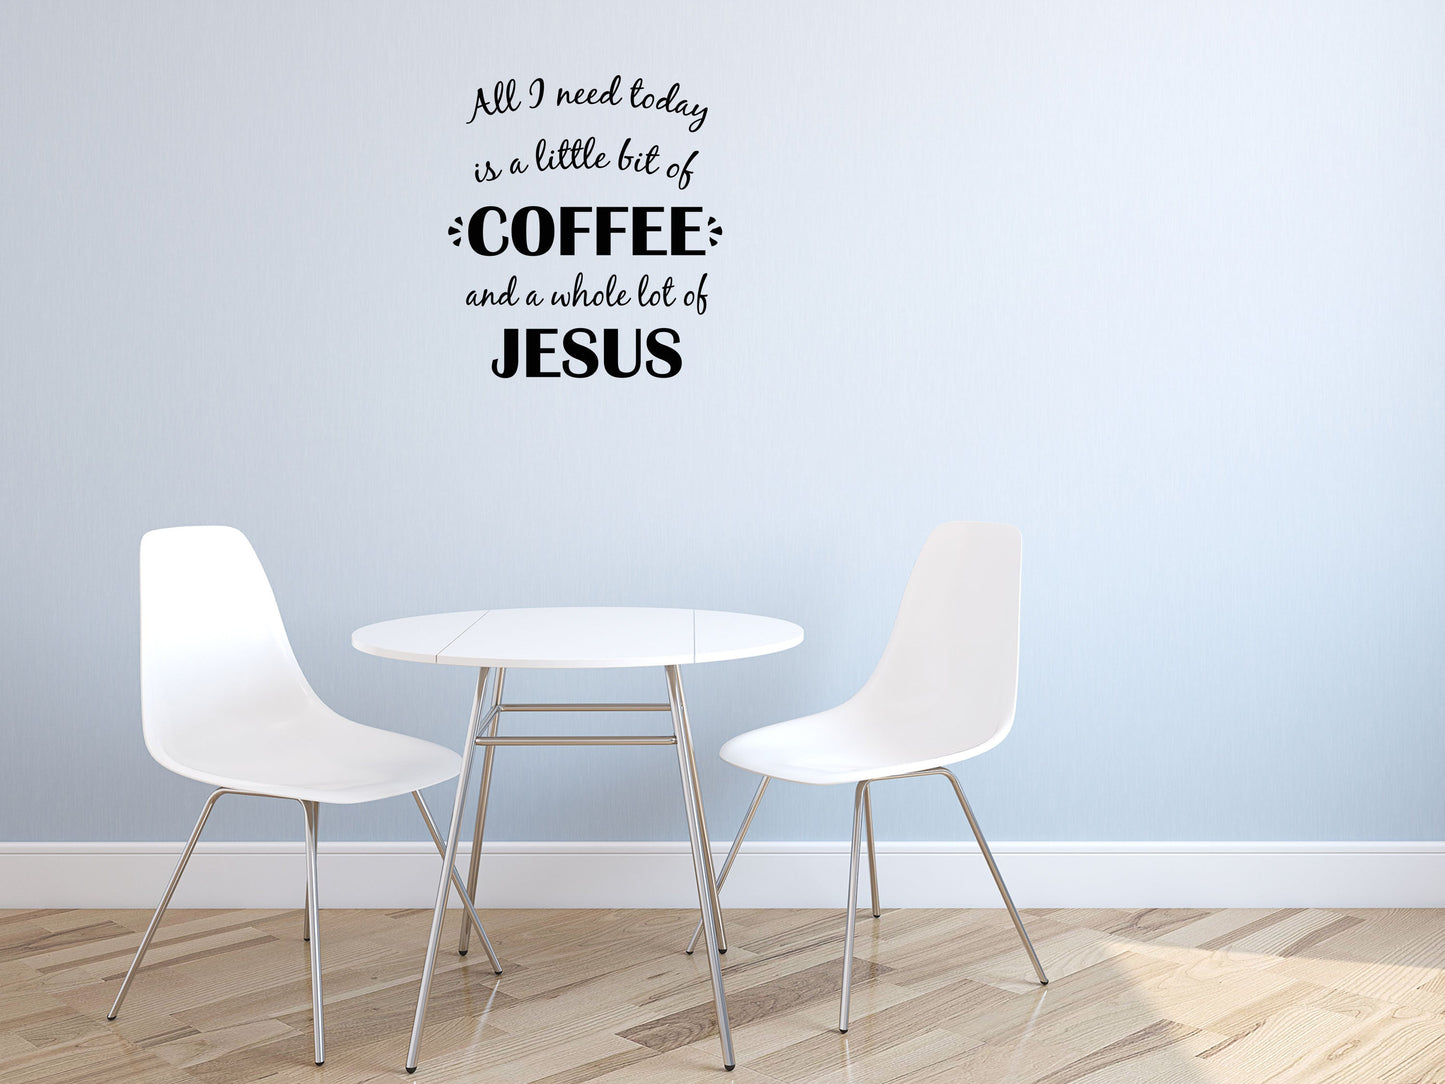 Coffee Wall Stickers - Inspirational Wall Decals Vinyl Wall Decal Done 